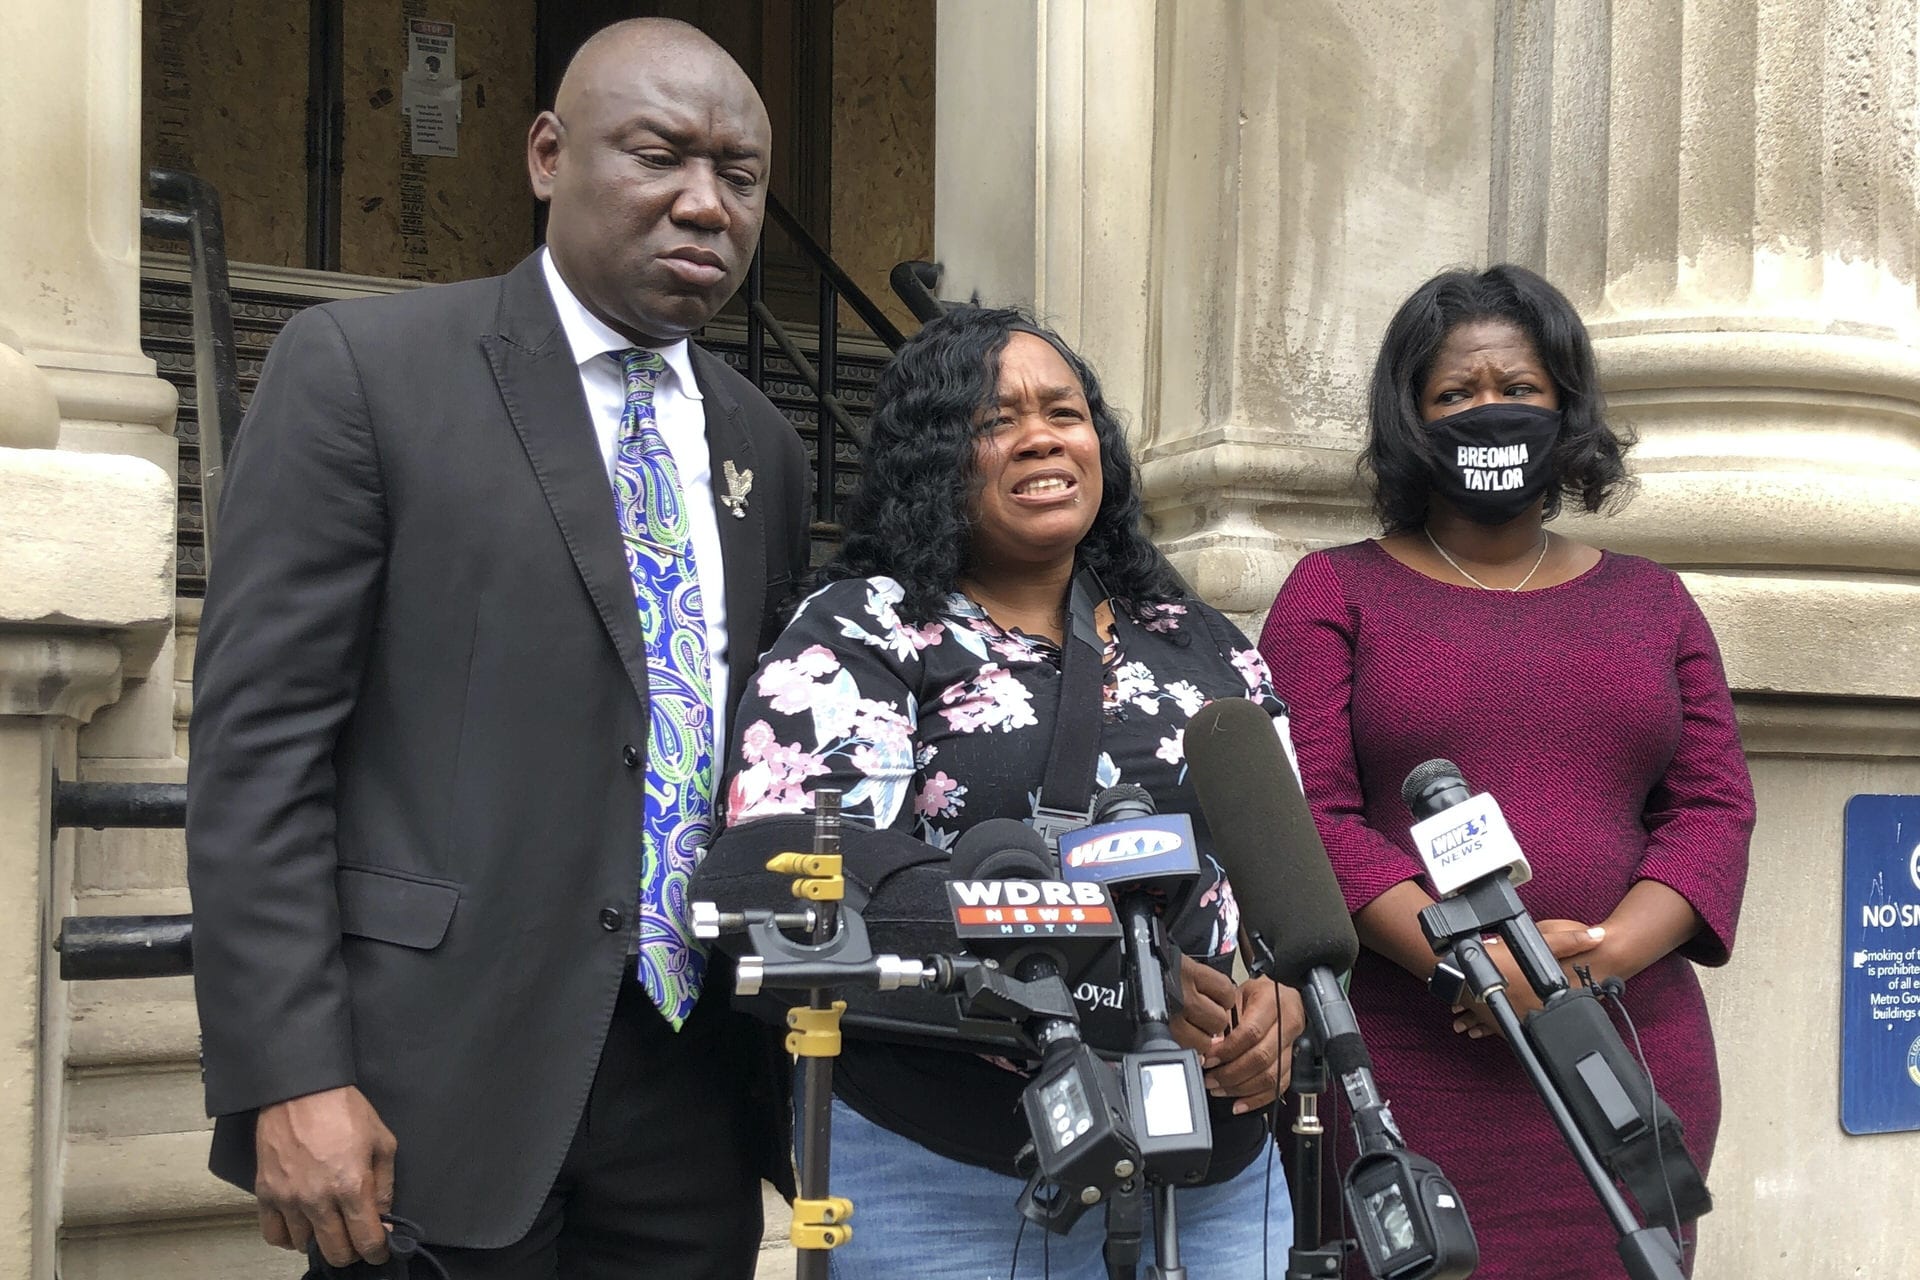 The $12 million Breonna Taylor settlement sparks reform, echoes #SayHerName cases photo